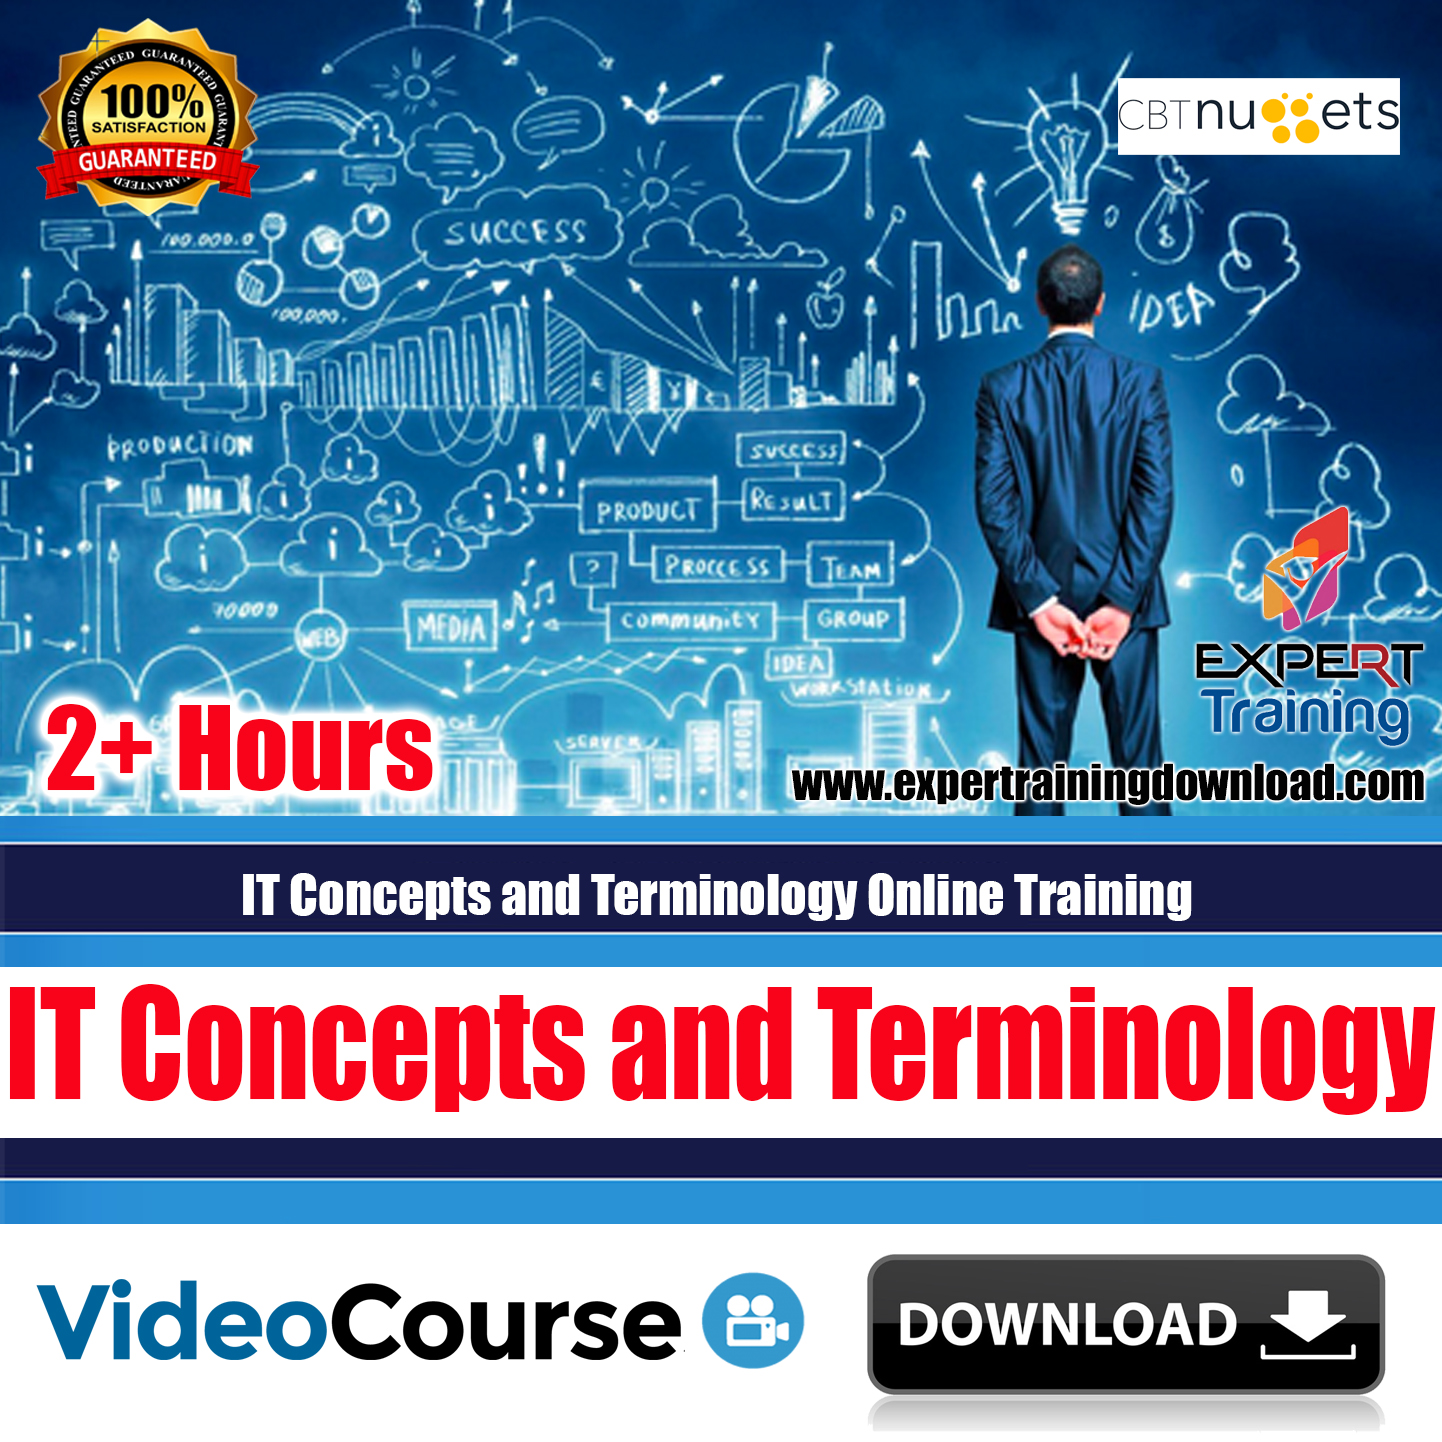 IT Concepts and Terminology Course